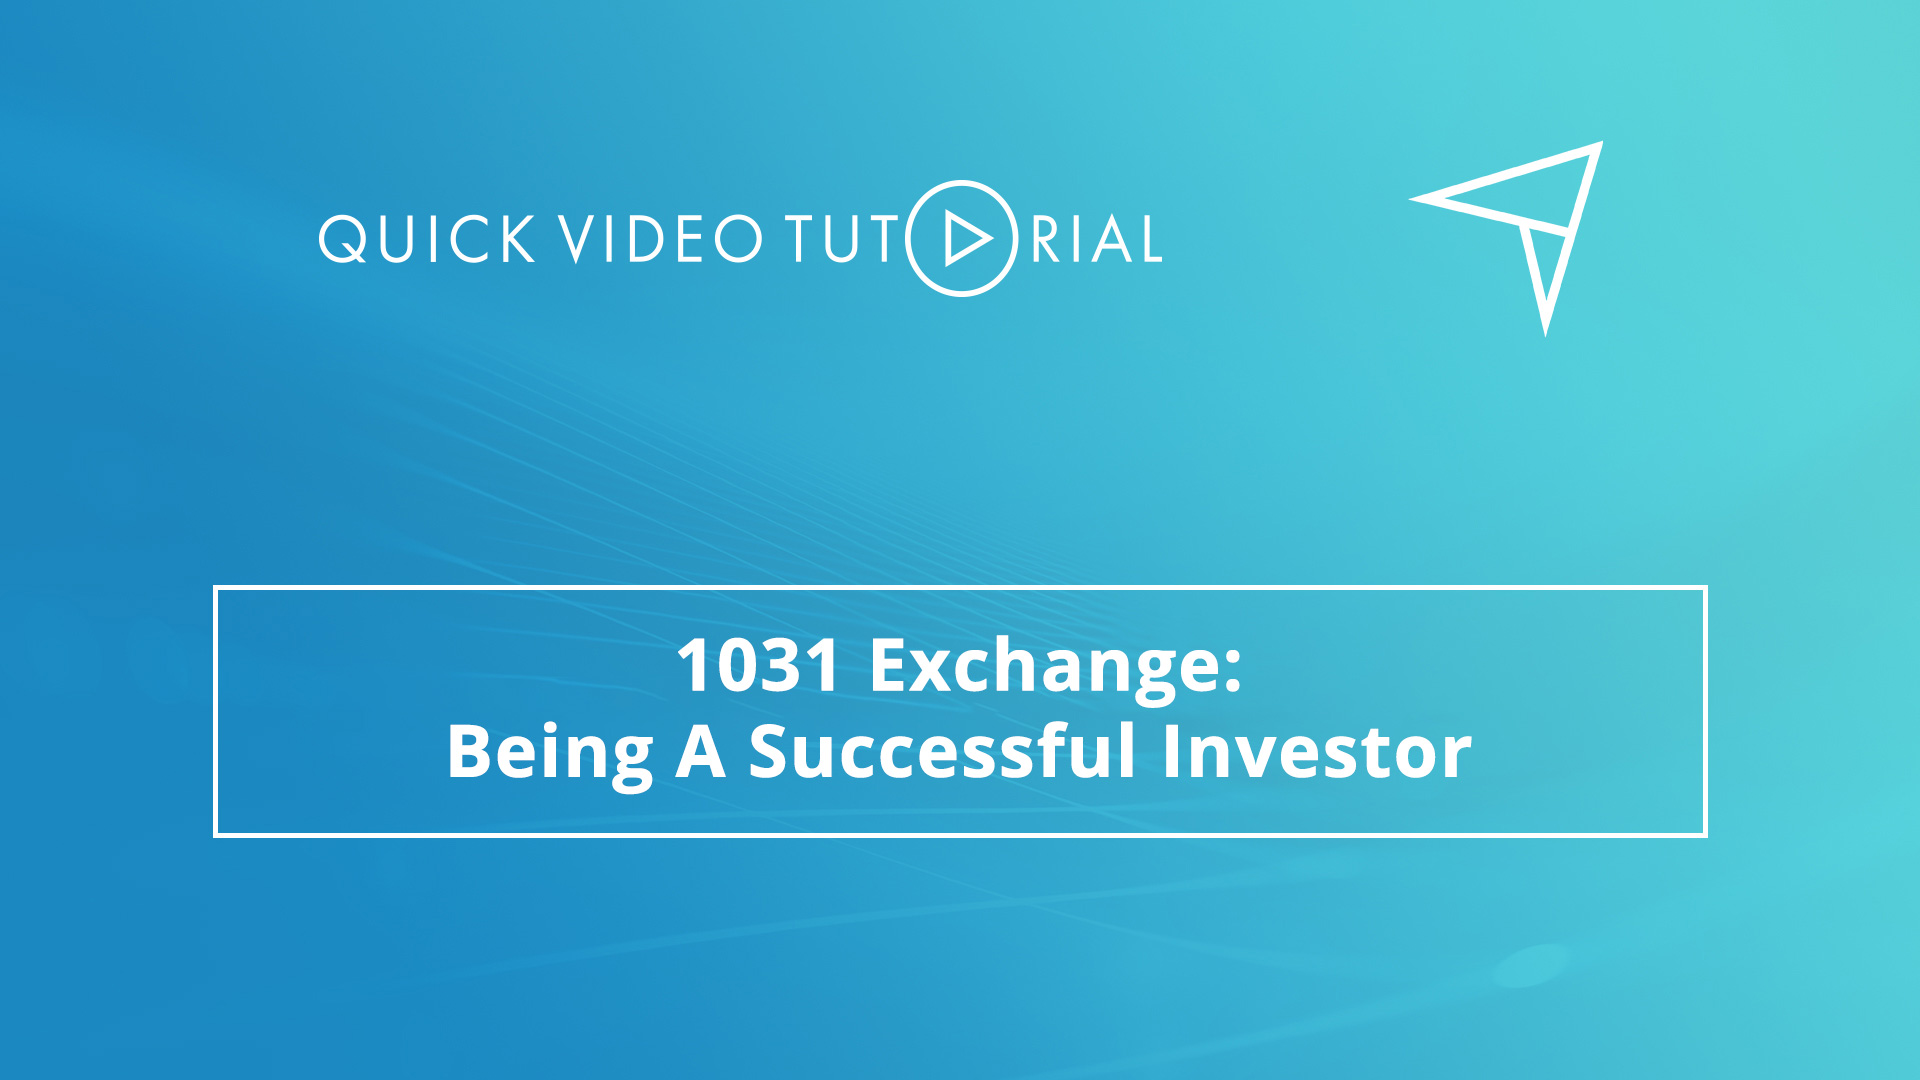 1031 Exchange: Being A Successful Investor - Daniel Goodwin - Provident 1031